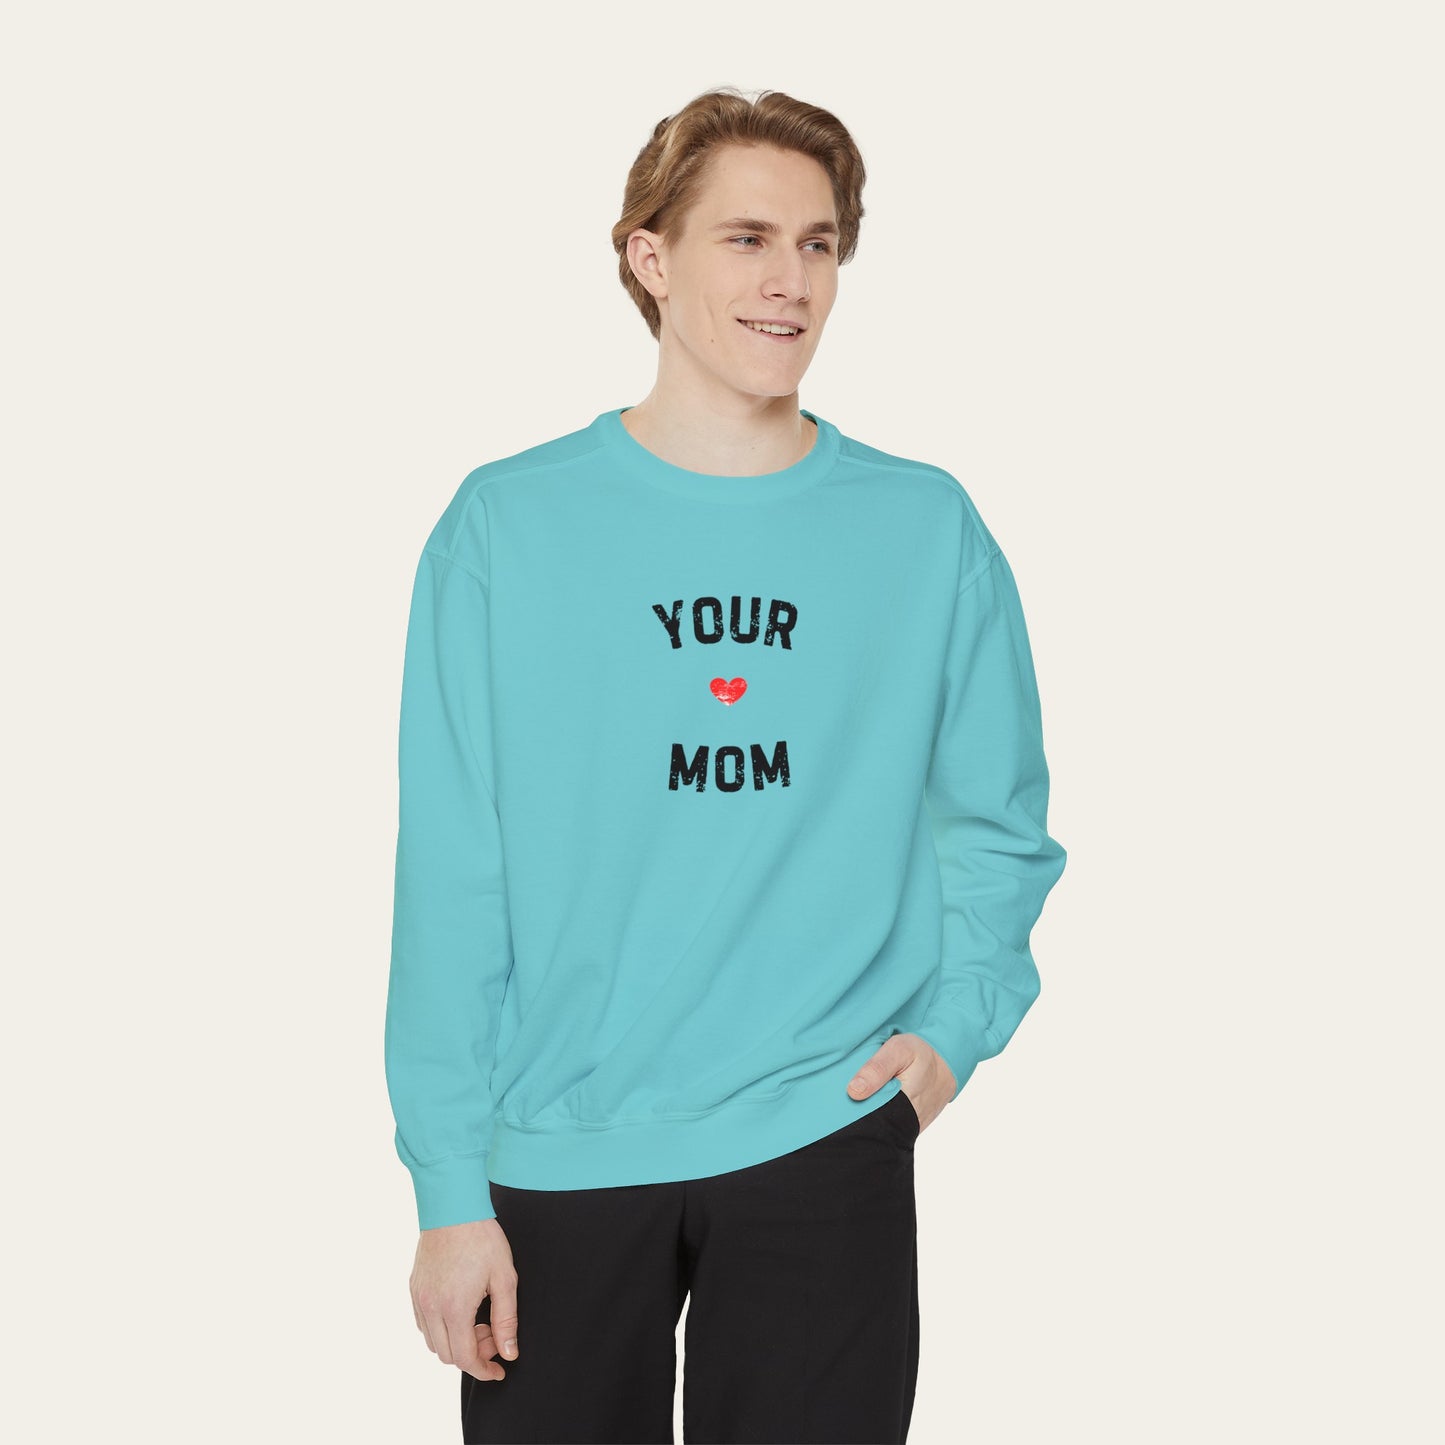 Your Mom Shirt Mama Shirt Mother's Day Gift For Mom Of The Year Shirt For New Mom Gift For New Mom Sweatshirt For Mom Birthday Gift For Her